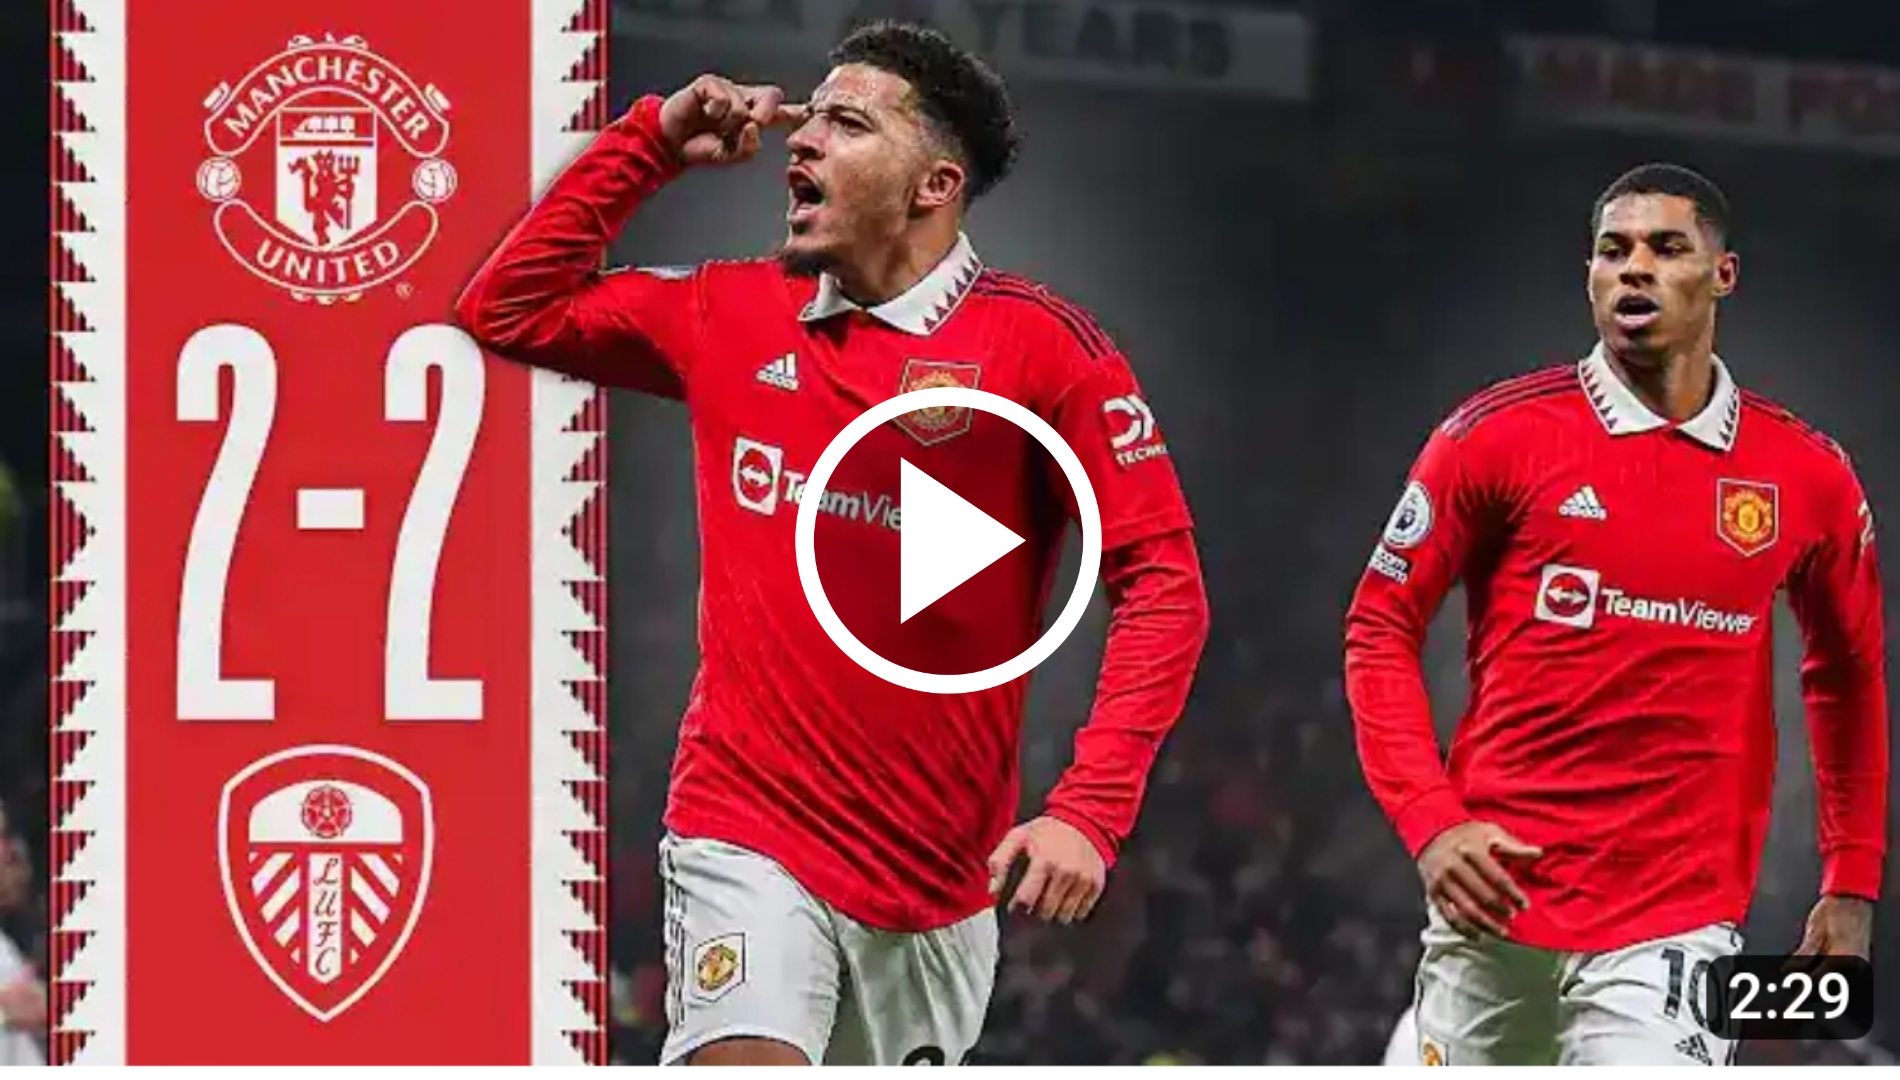 Highlights: Watch Man United vs Leeds united (2-2) extended highlights and goals 16 Sportelo